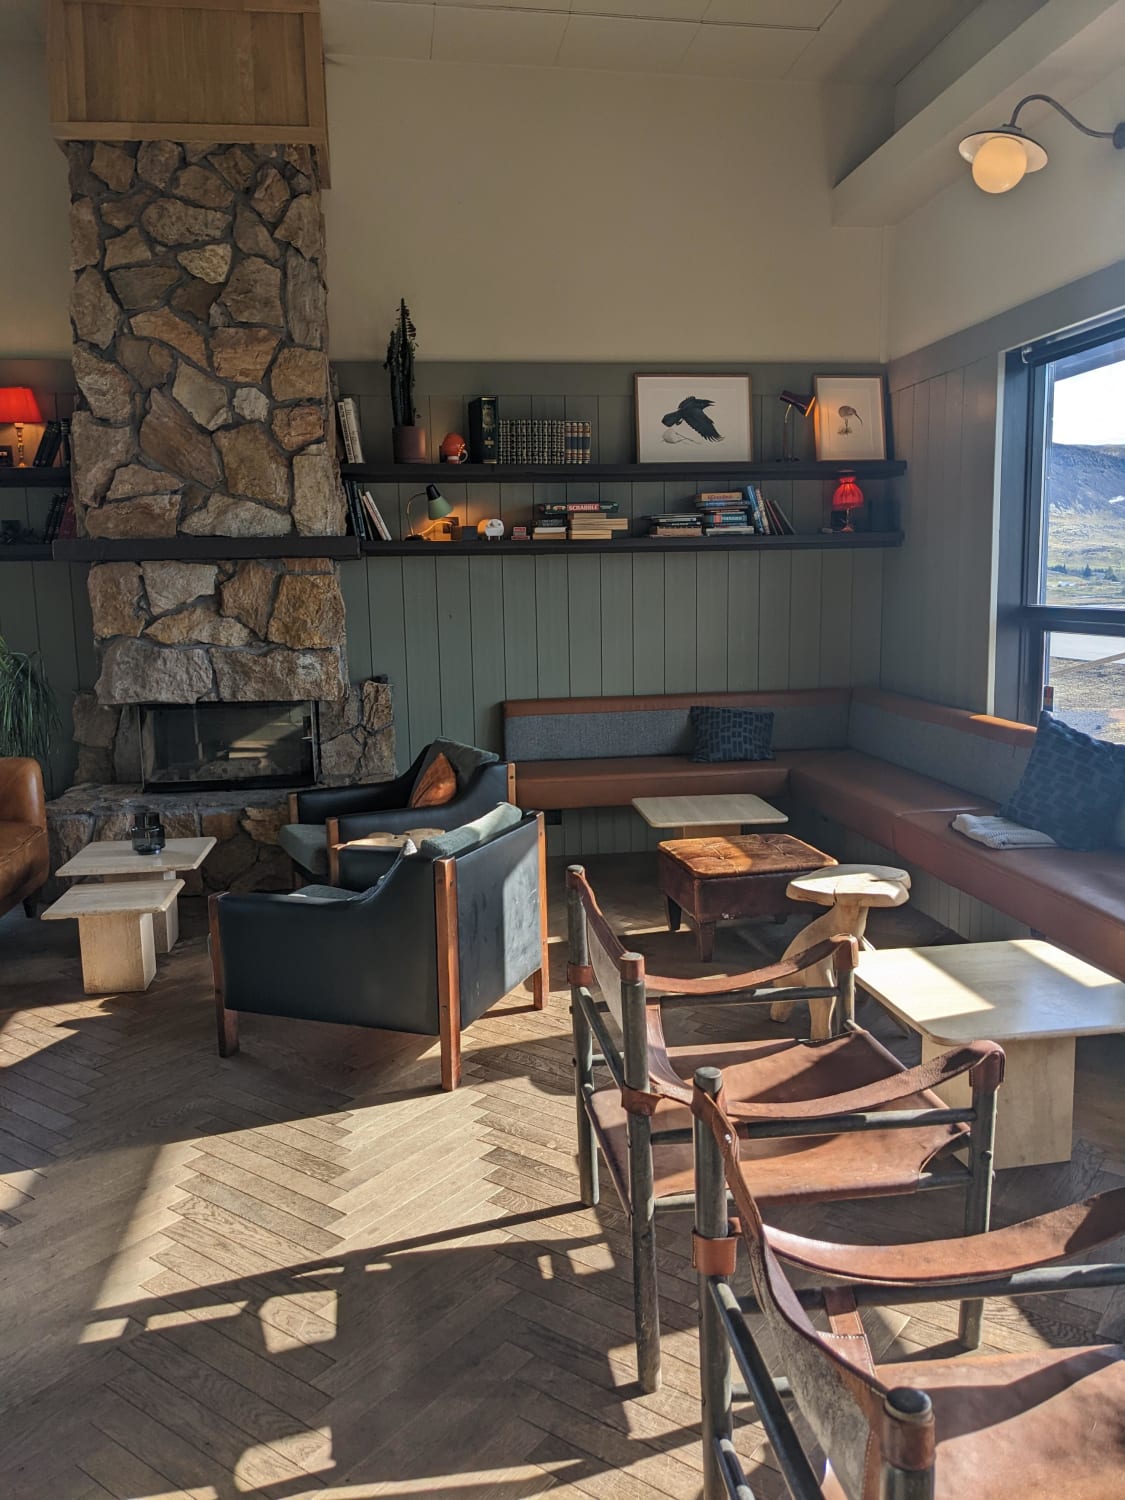 This sunny (rare) cafe in Iceland